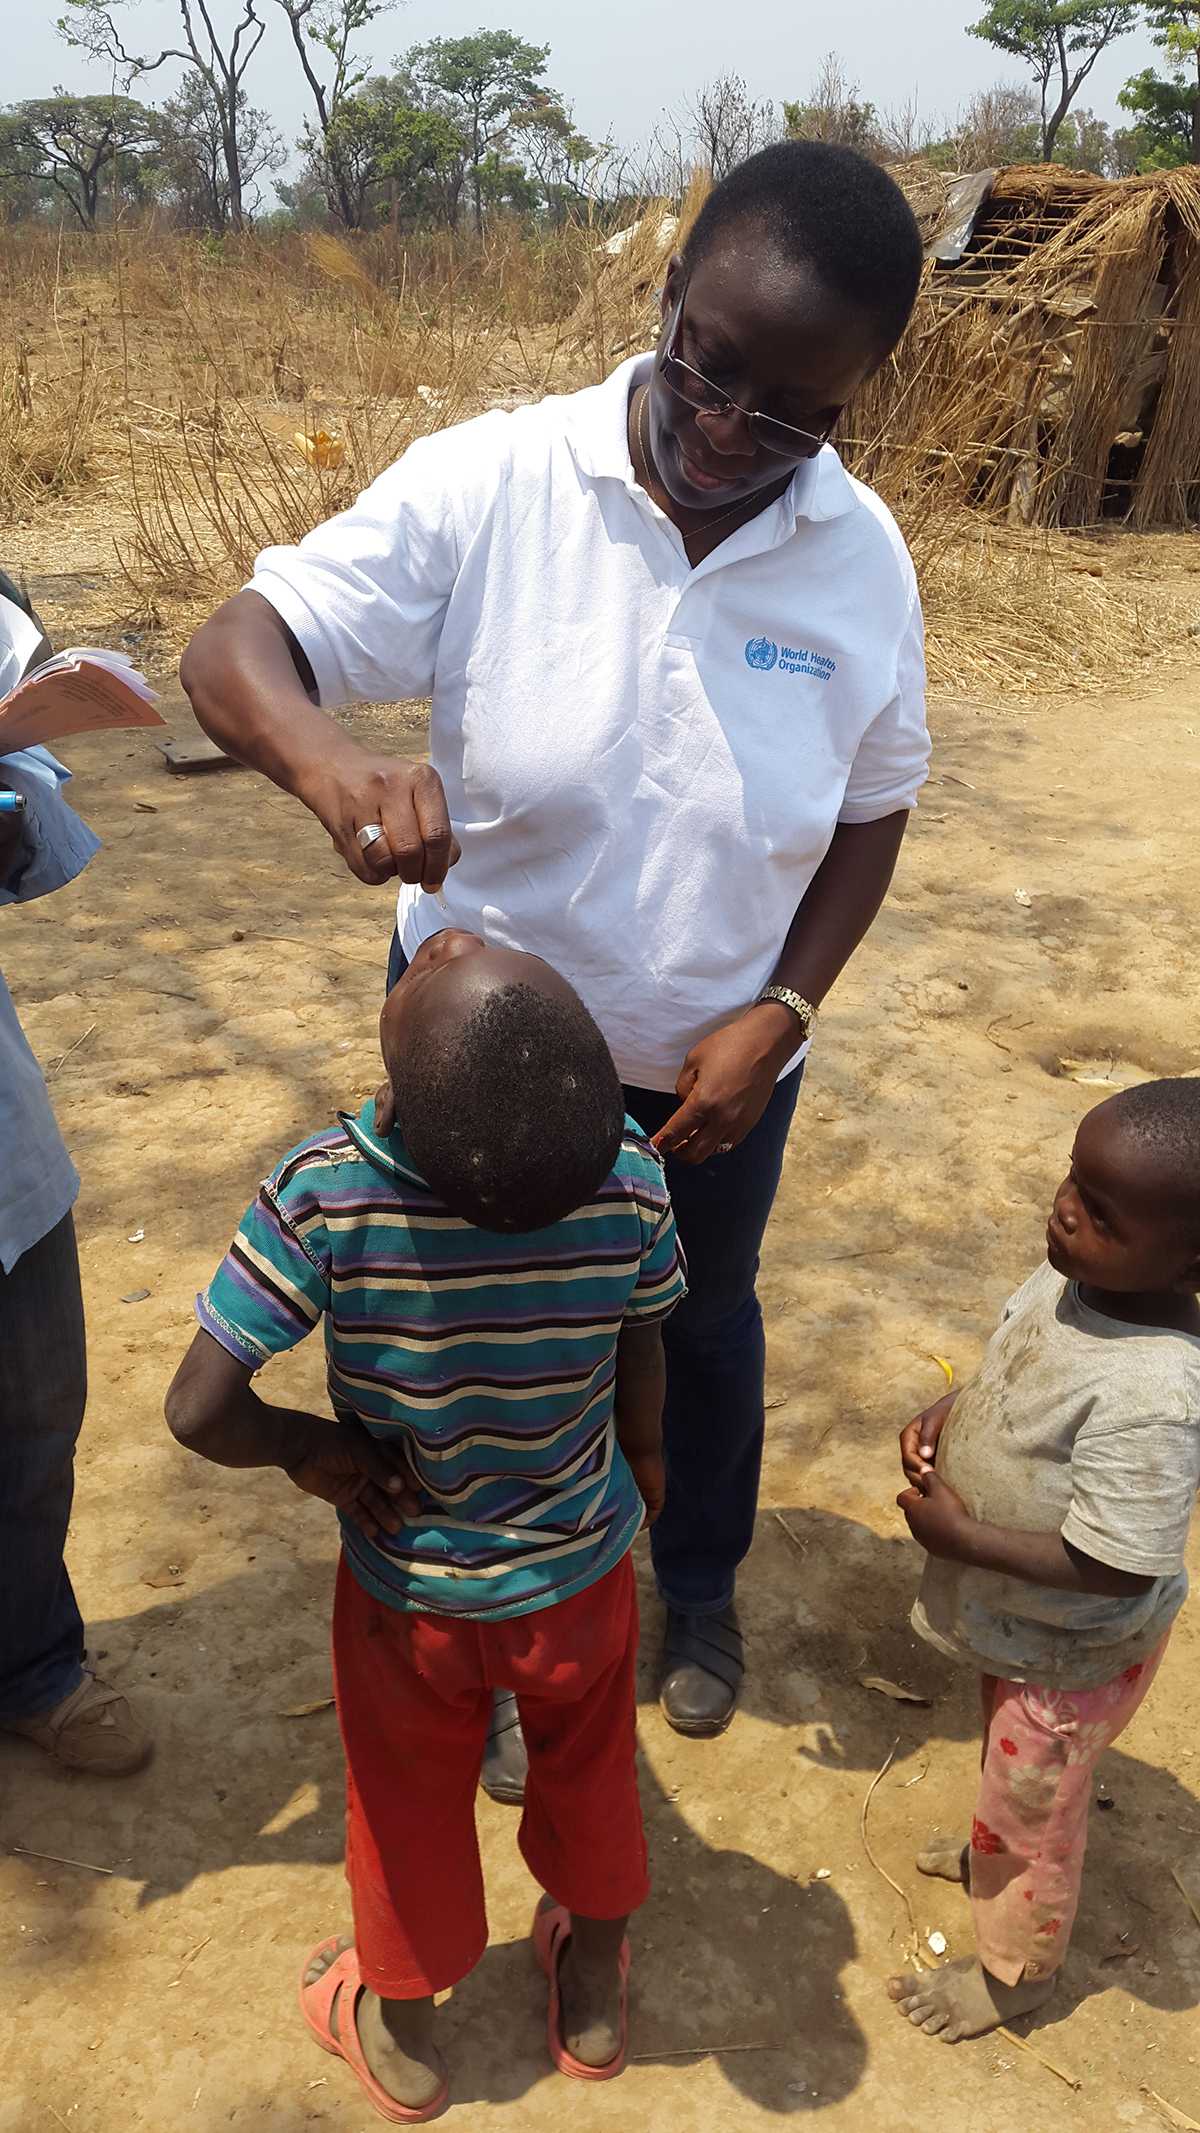 Democratic Republic of the Congo: Dr. Aissata Diaha from CDC’s Global Immunization Division administering the oral polio vaccine to a child during the polio immunization campaign in a remote area of Lubumbashi.